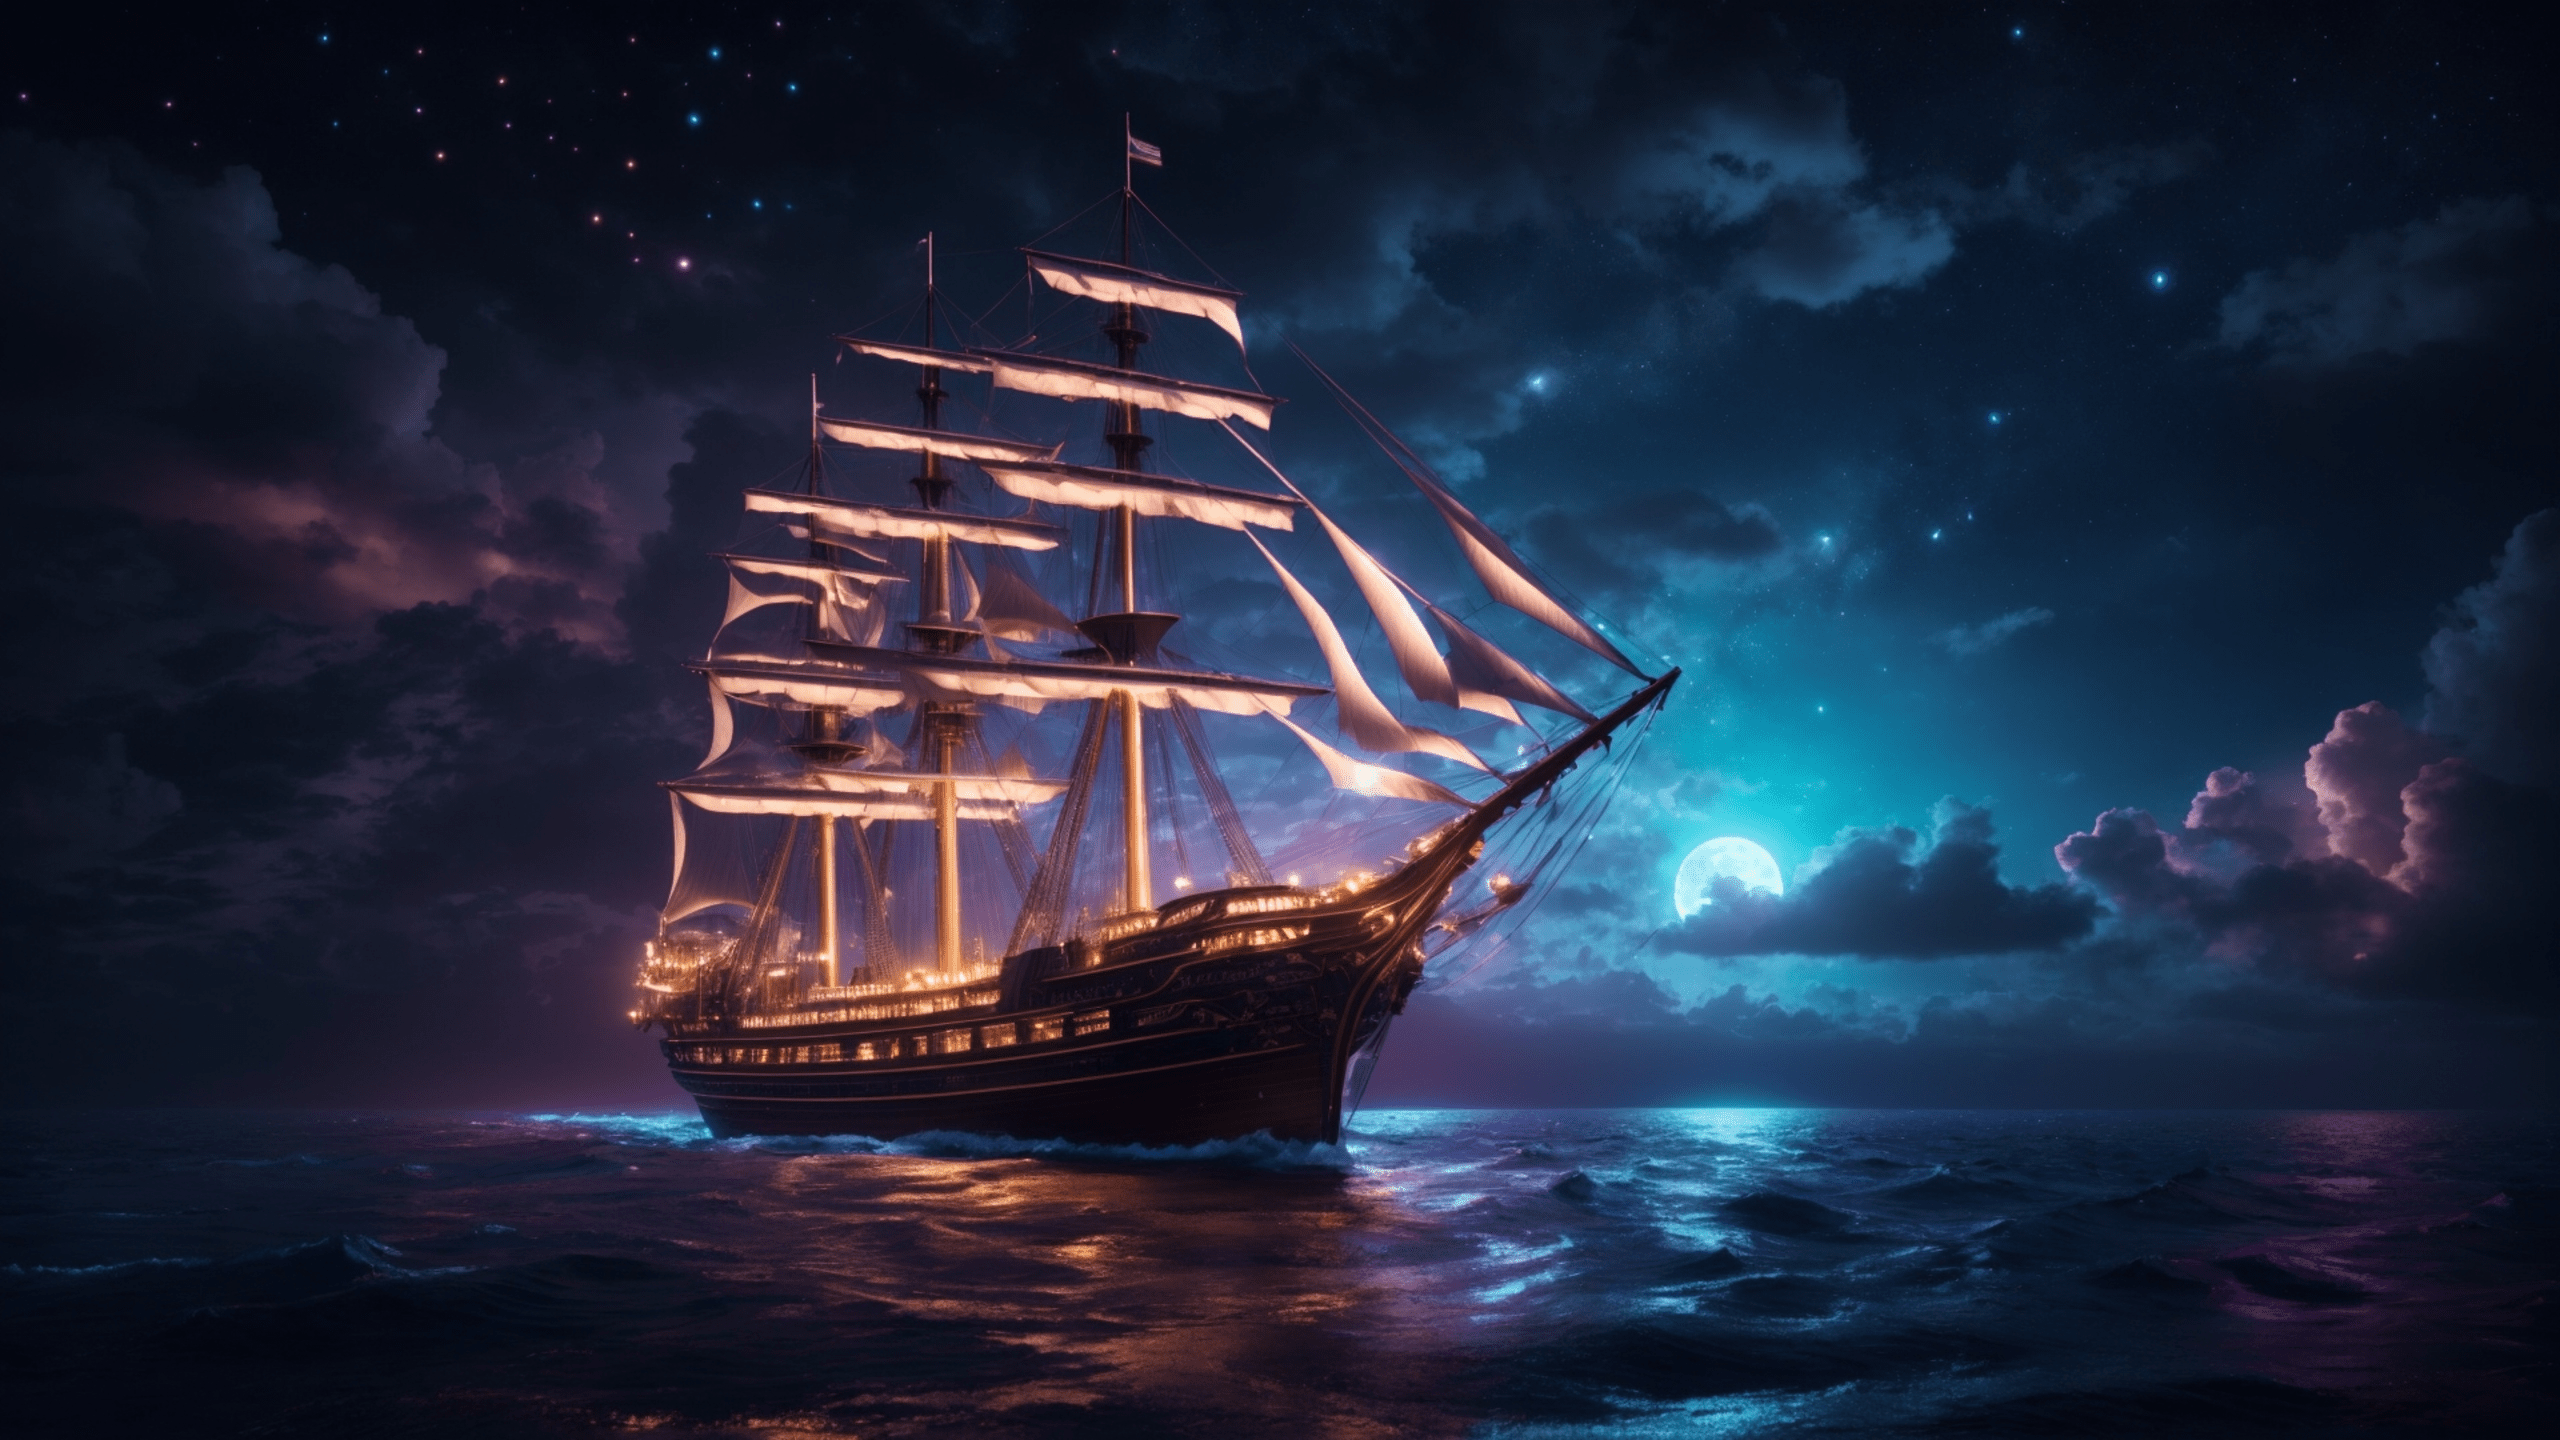 A ship sails on the ocean at night - Pirate